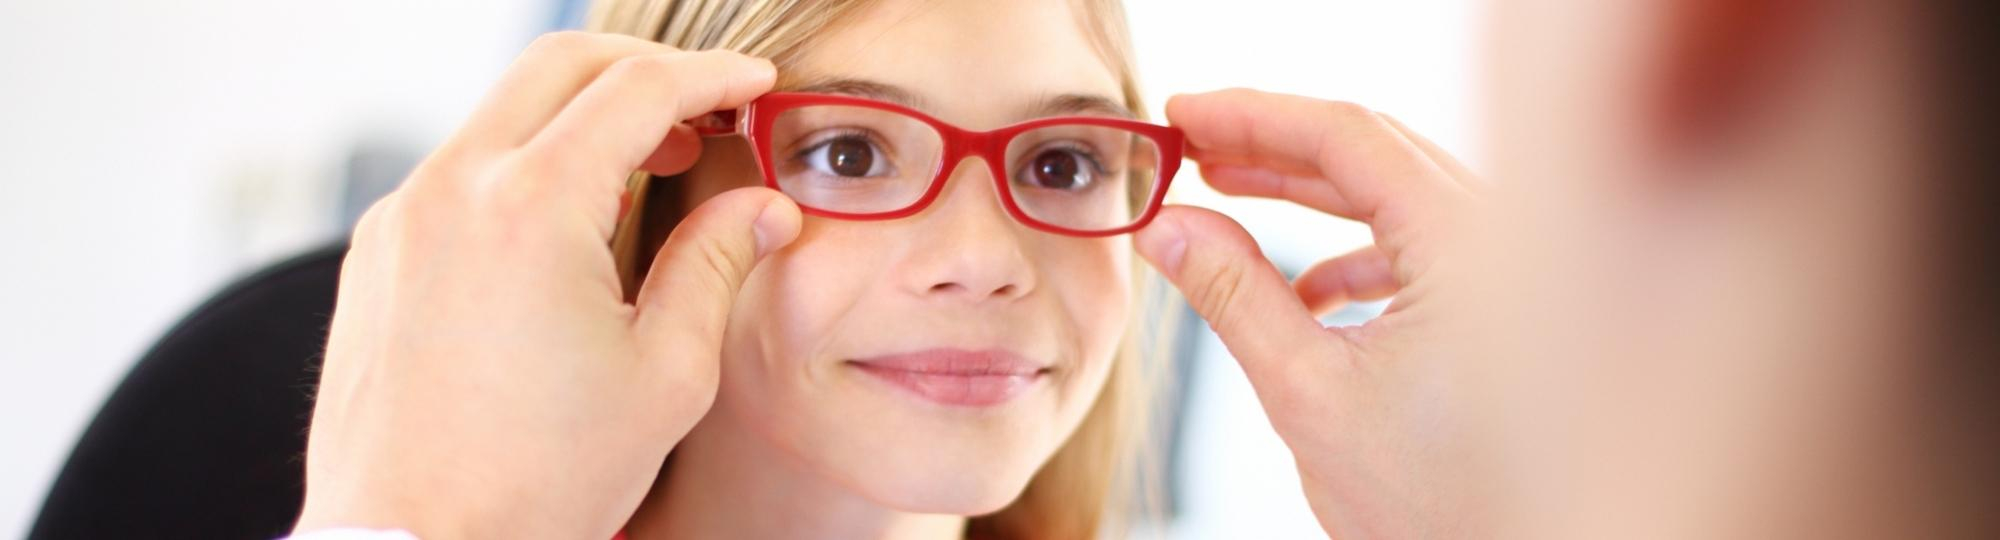 Child being fit for eyeglasses